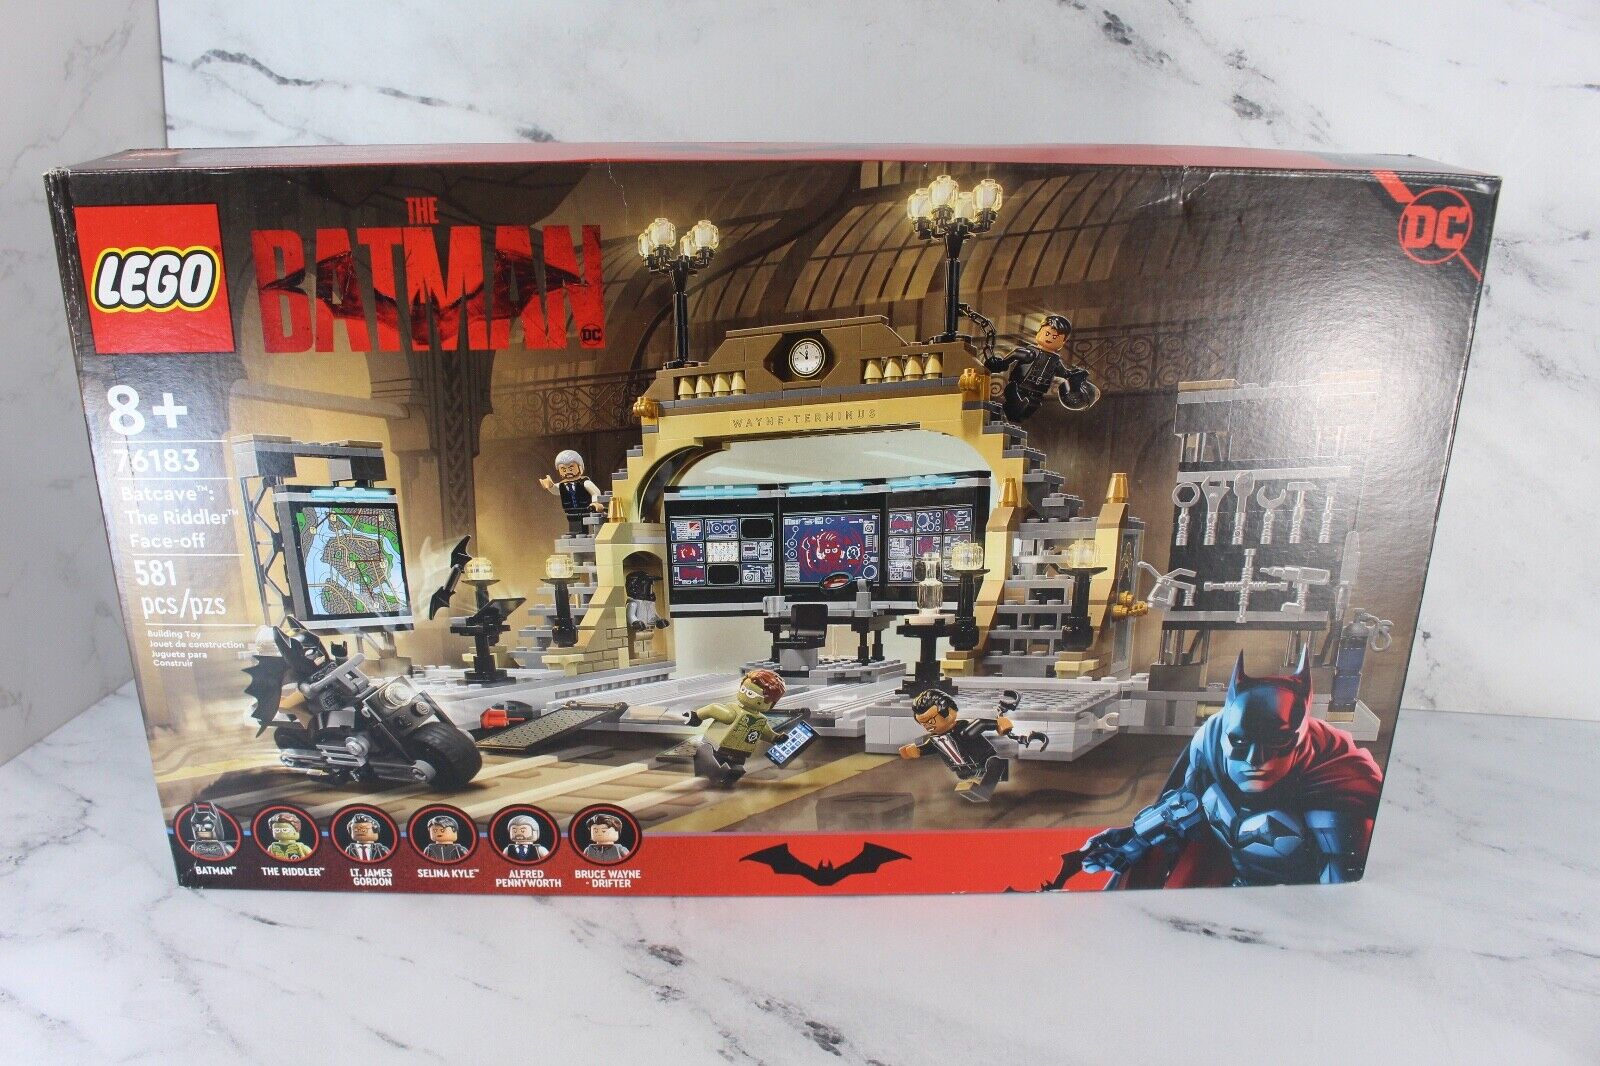 Lego DC Batcave: Box Only The Riddler Face-off 76183 Box Only